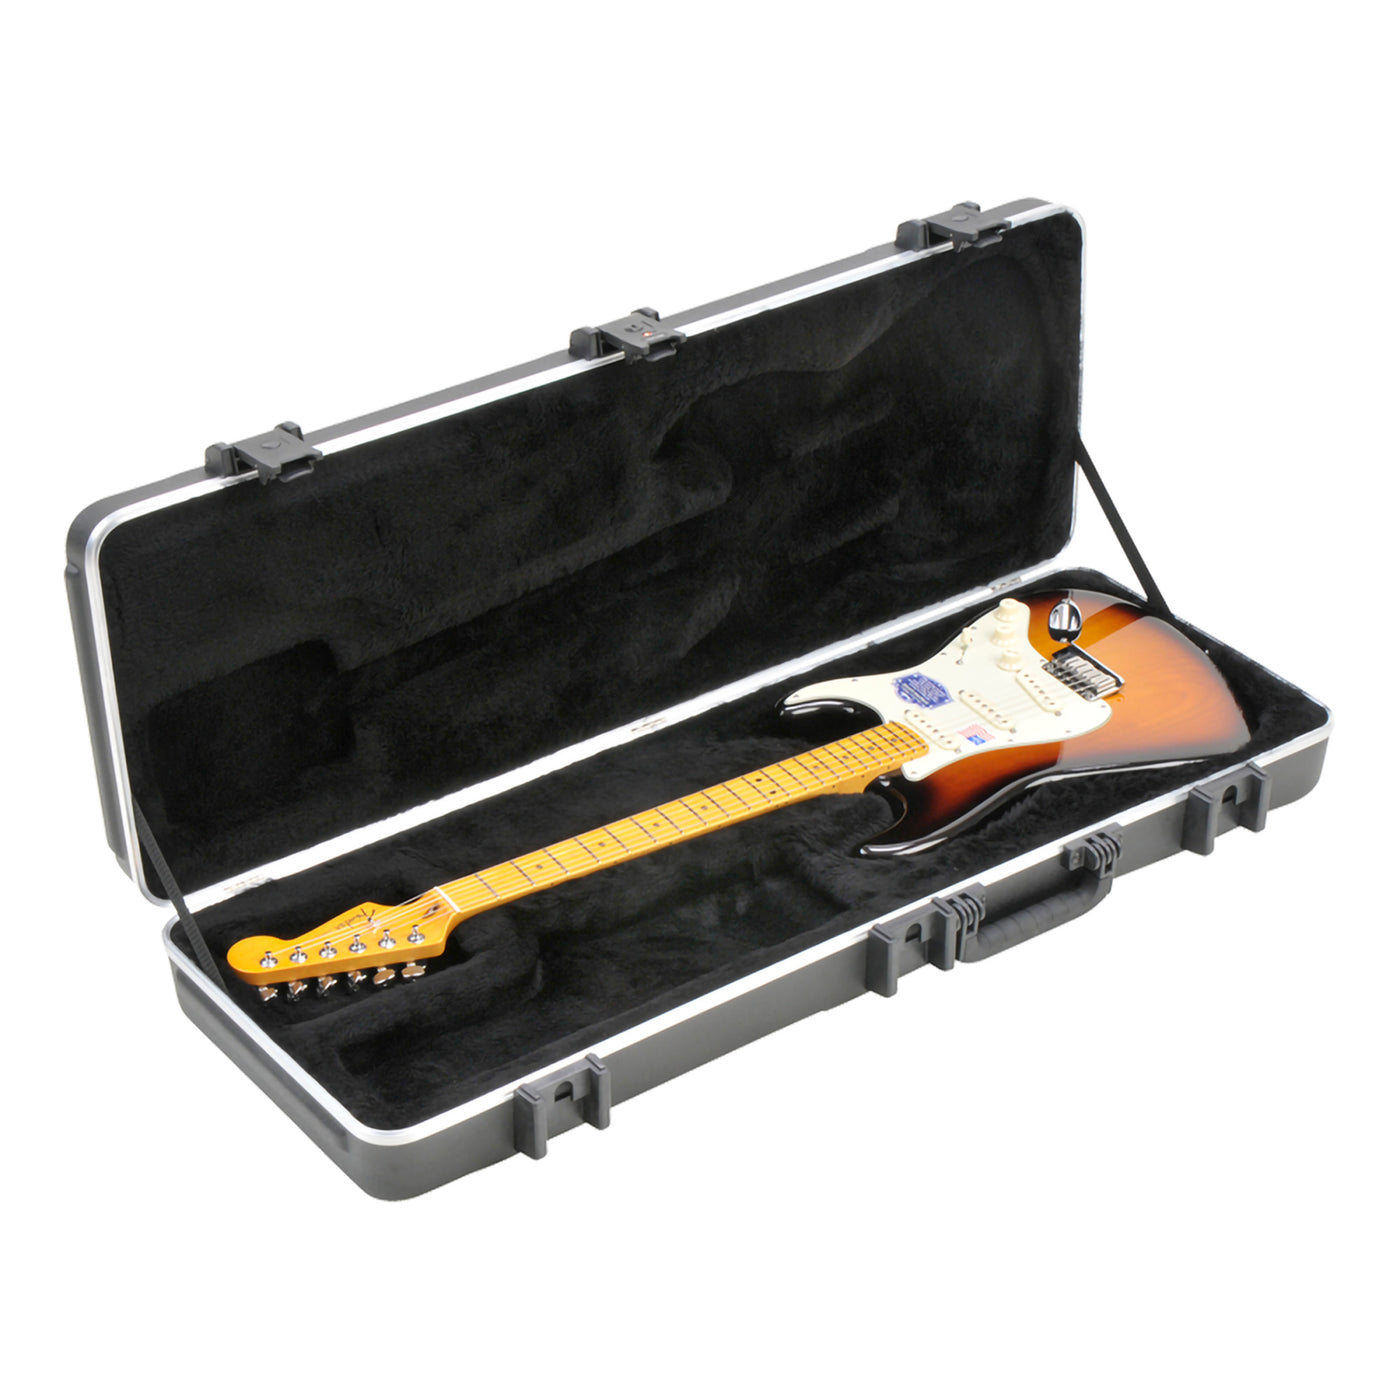 SKB Pro Rectangular Electric Guitar Case - Strat/Tele Hardshell Strat/Tele-style Guitar Case with ABS Exterior Shell, Cushion Handles, and TSA Accepted Locks (1SKB-66PRO)